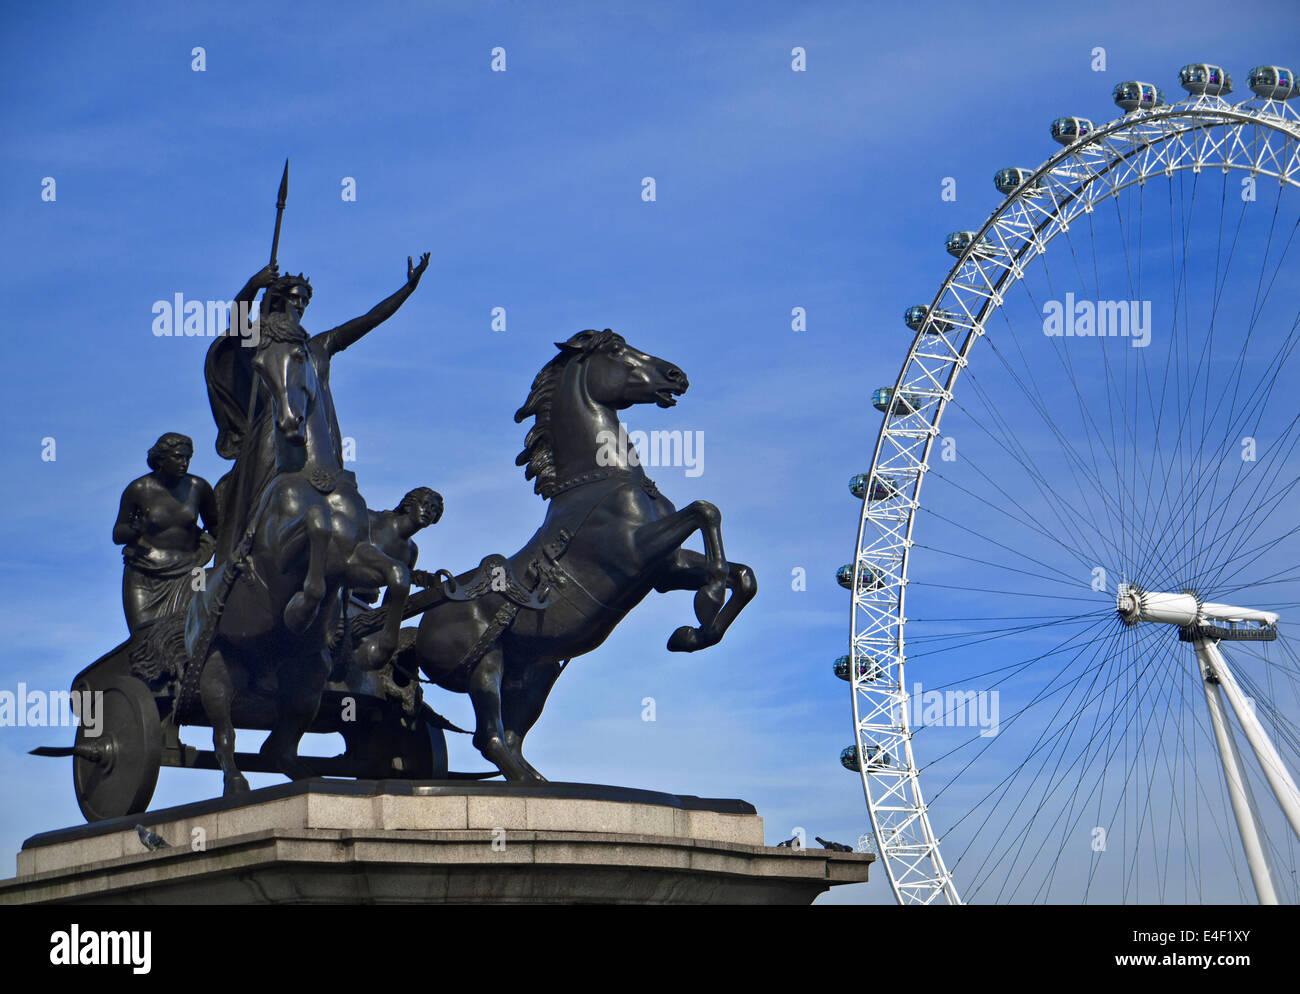 Statue of Boudica on horse drawn chariot with London Eye behind Westminster Bridge London UK Stock Photo